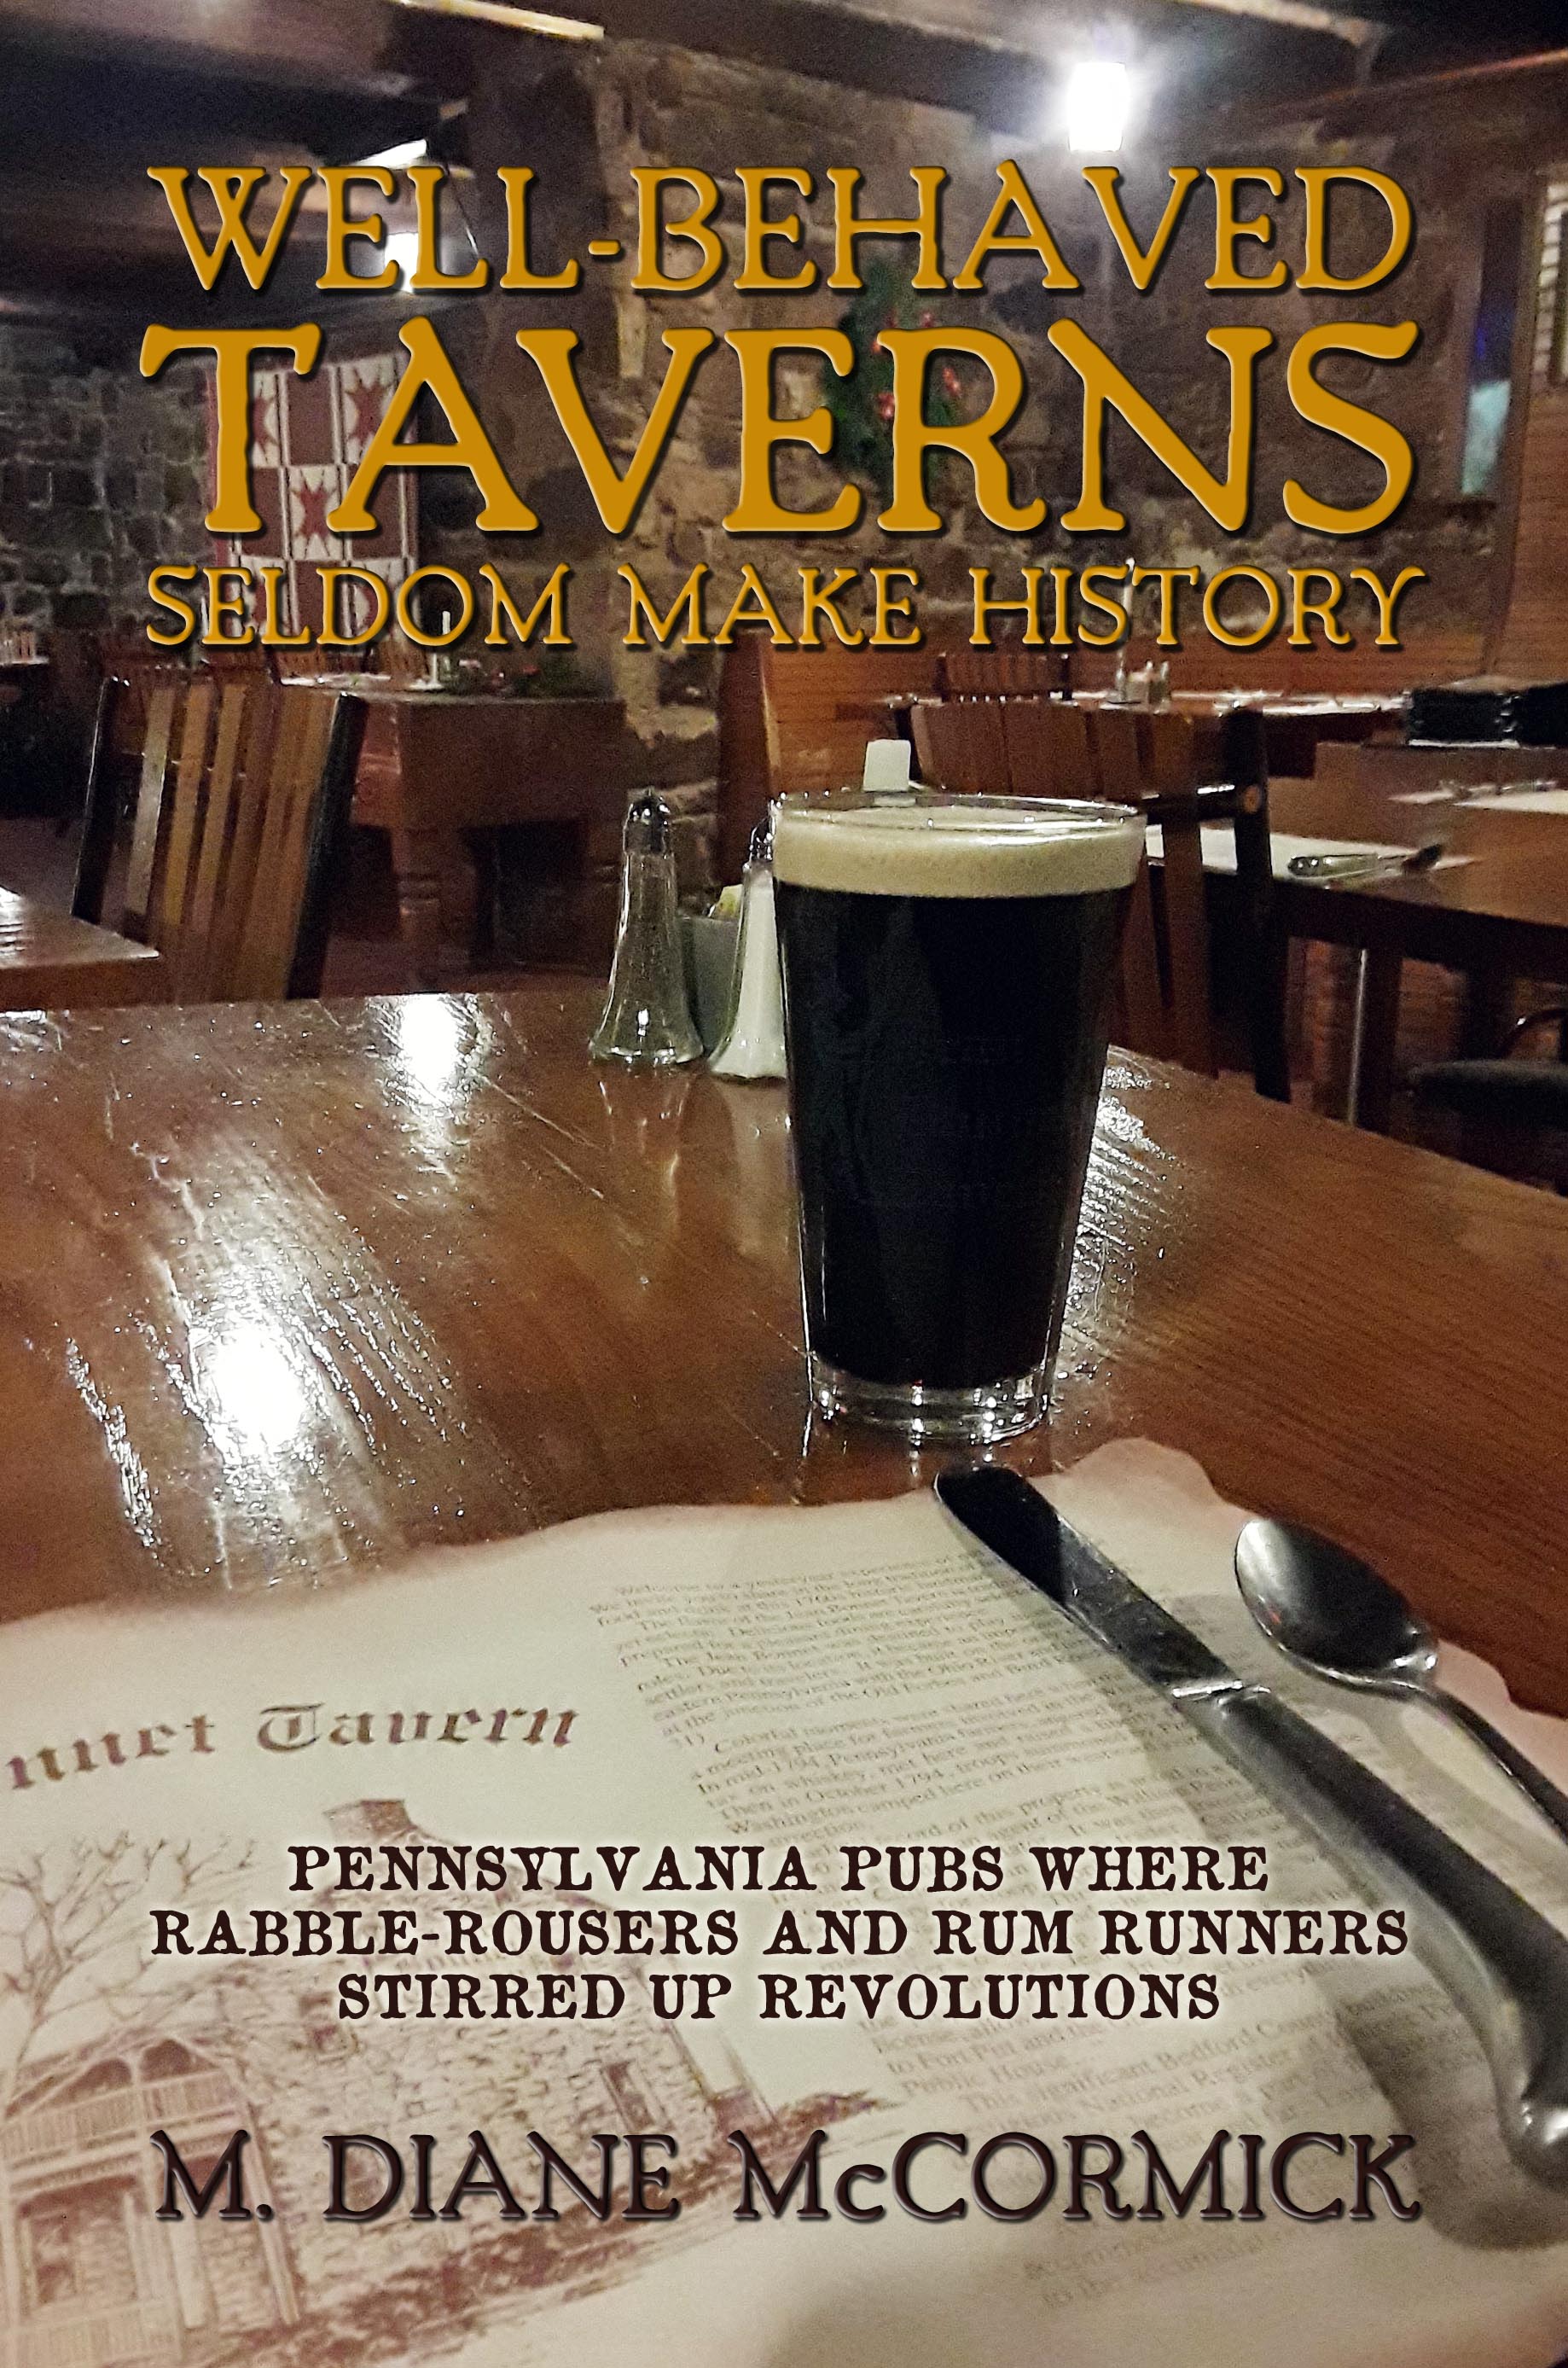 Diane McCormick’s “Well-Behaved Taverns Seldom Make History” tops as the Sunbury Press bestseller for March